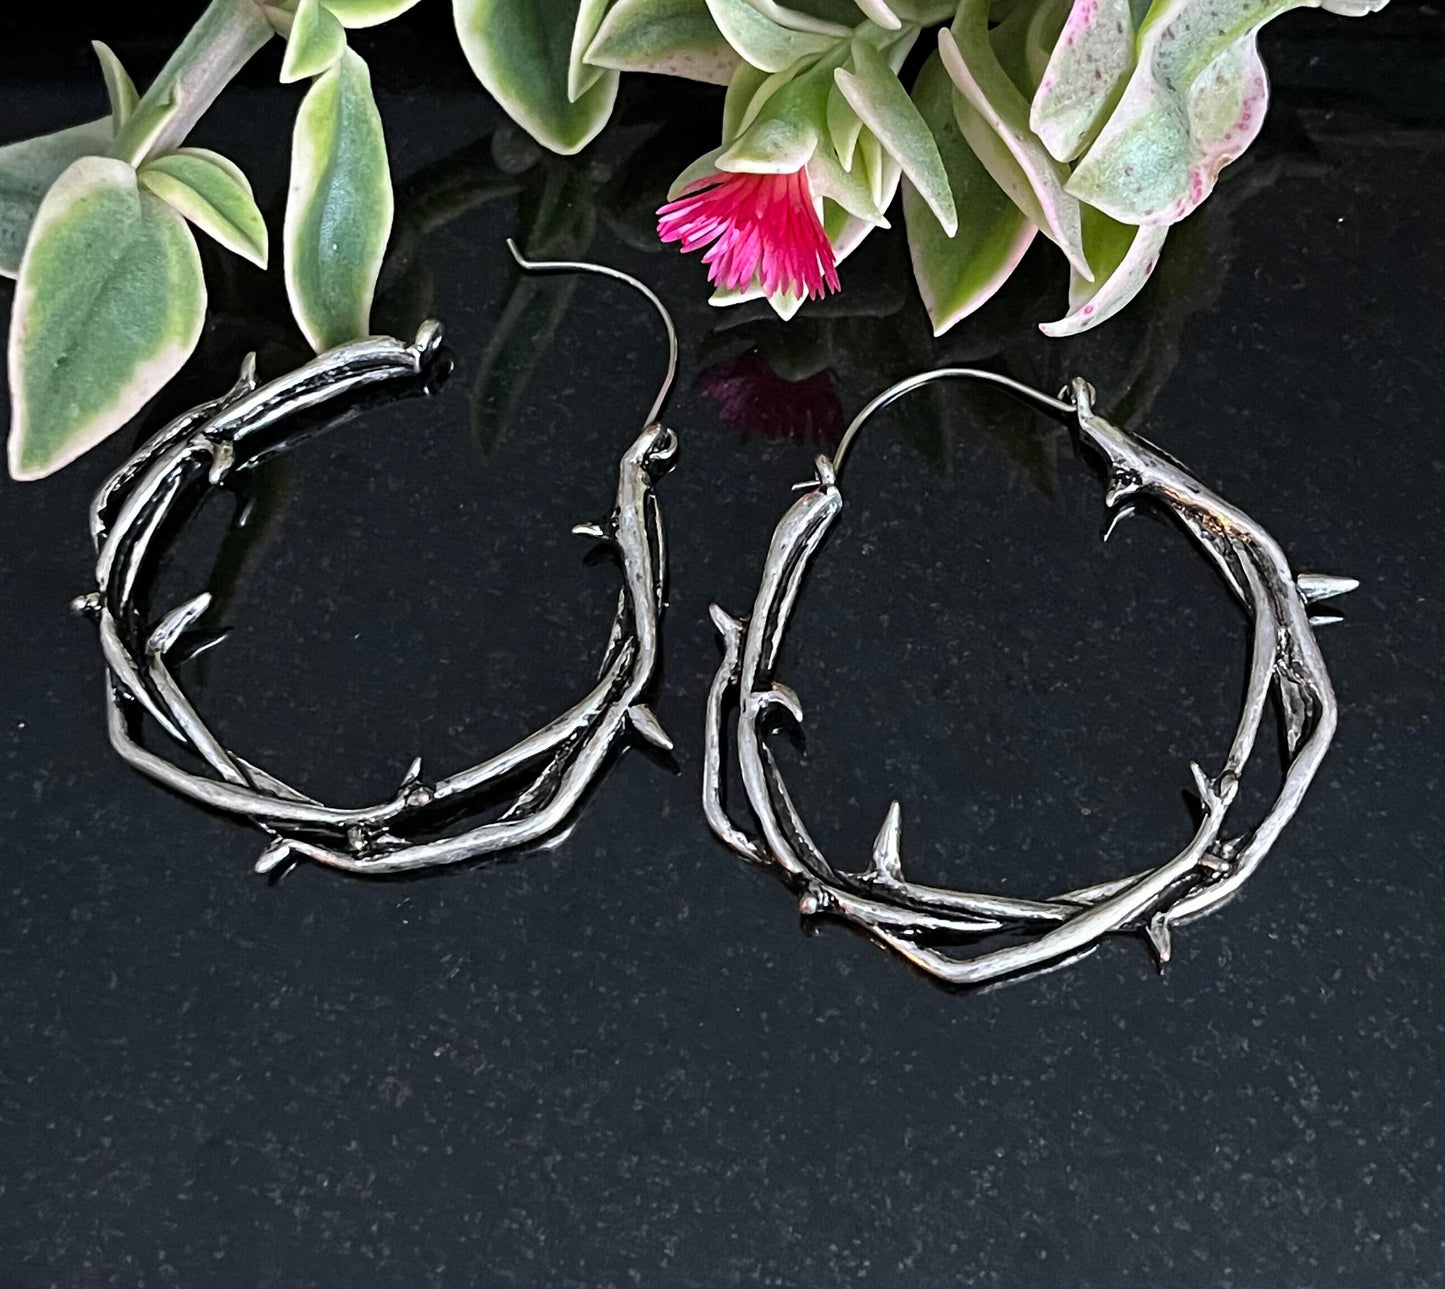 Pair of Unique 20g Twisted Thorn Hoop Earrings - Use As Regular Earrings or Through Tunnels!